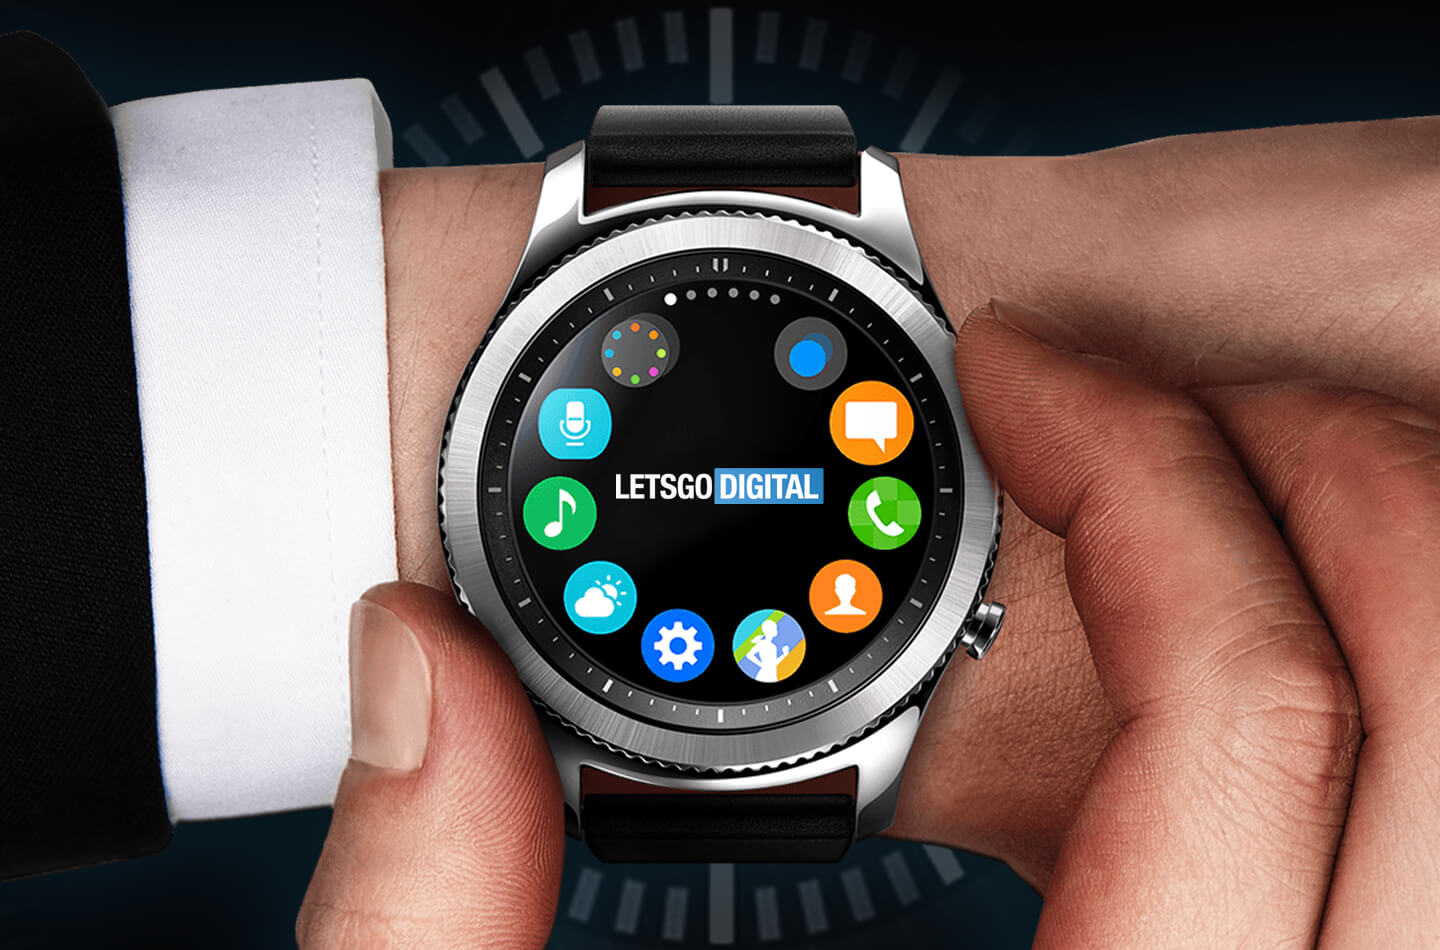 Aug 09, · The company is going to release the Galaxy Watch on August 24 in the United States and August 31 in South Korea.It will subsequently be released in other markets across the globe on .